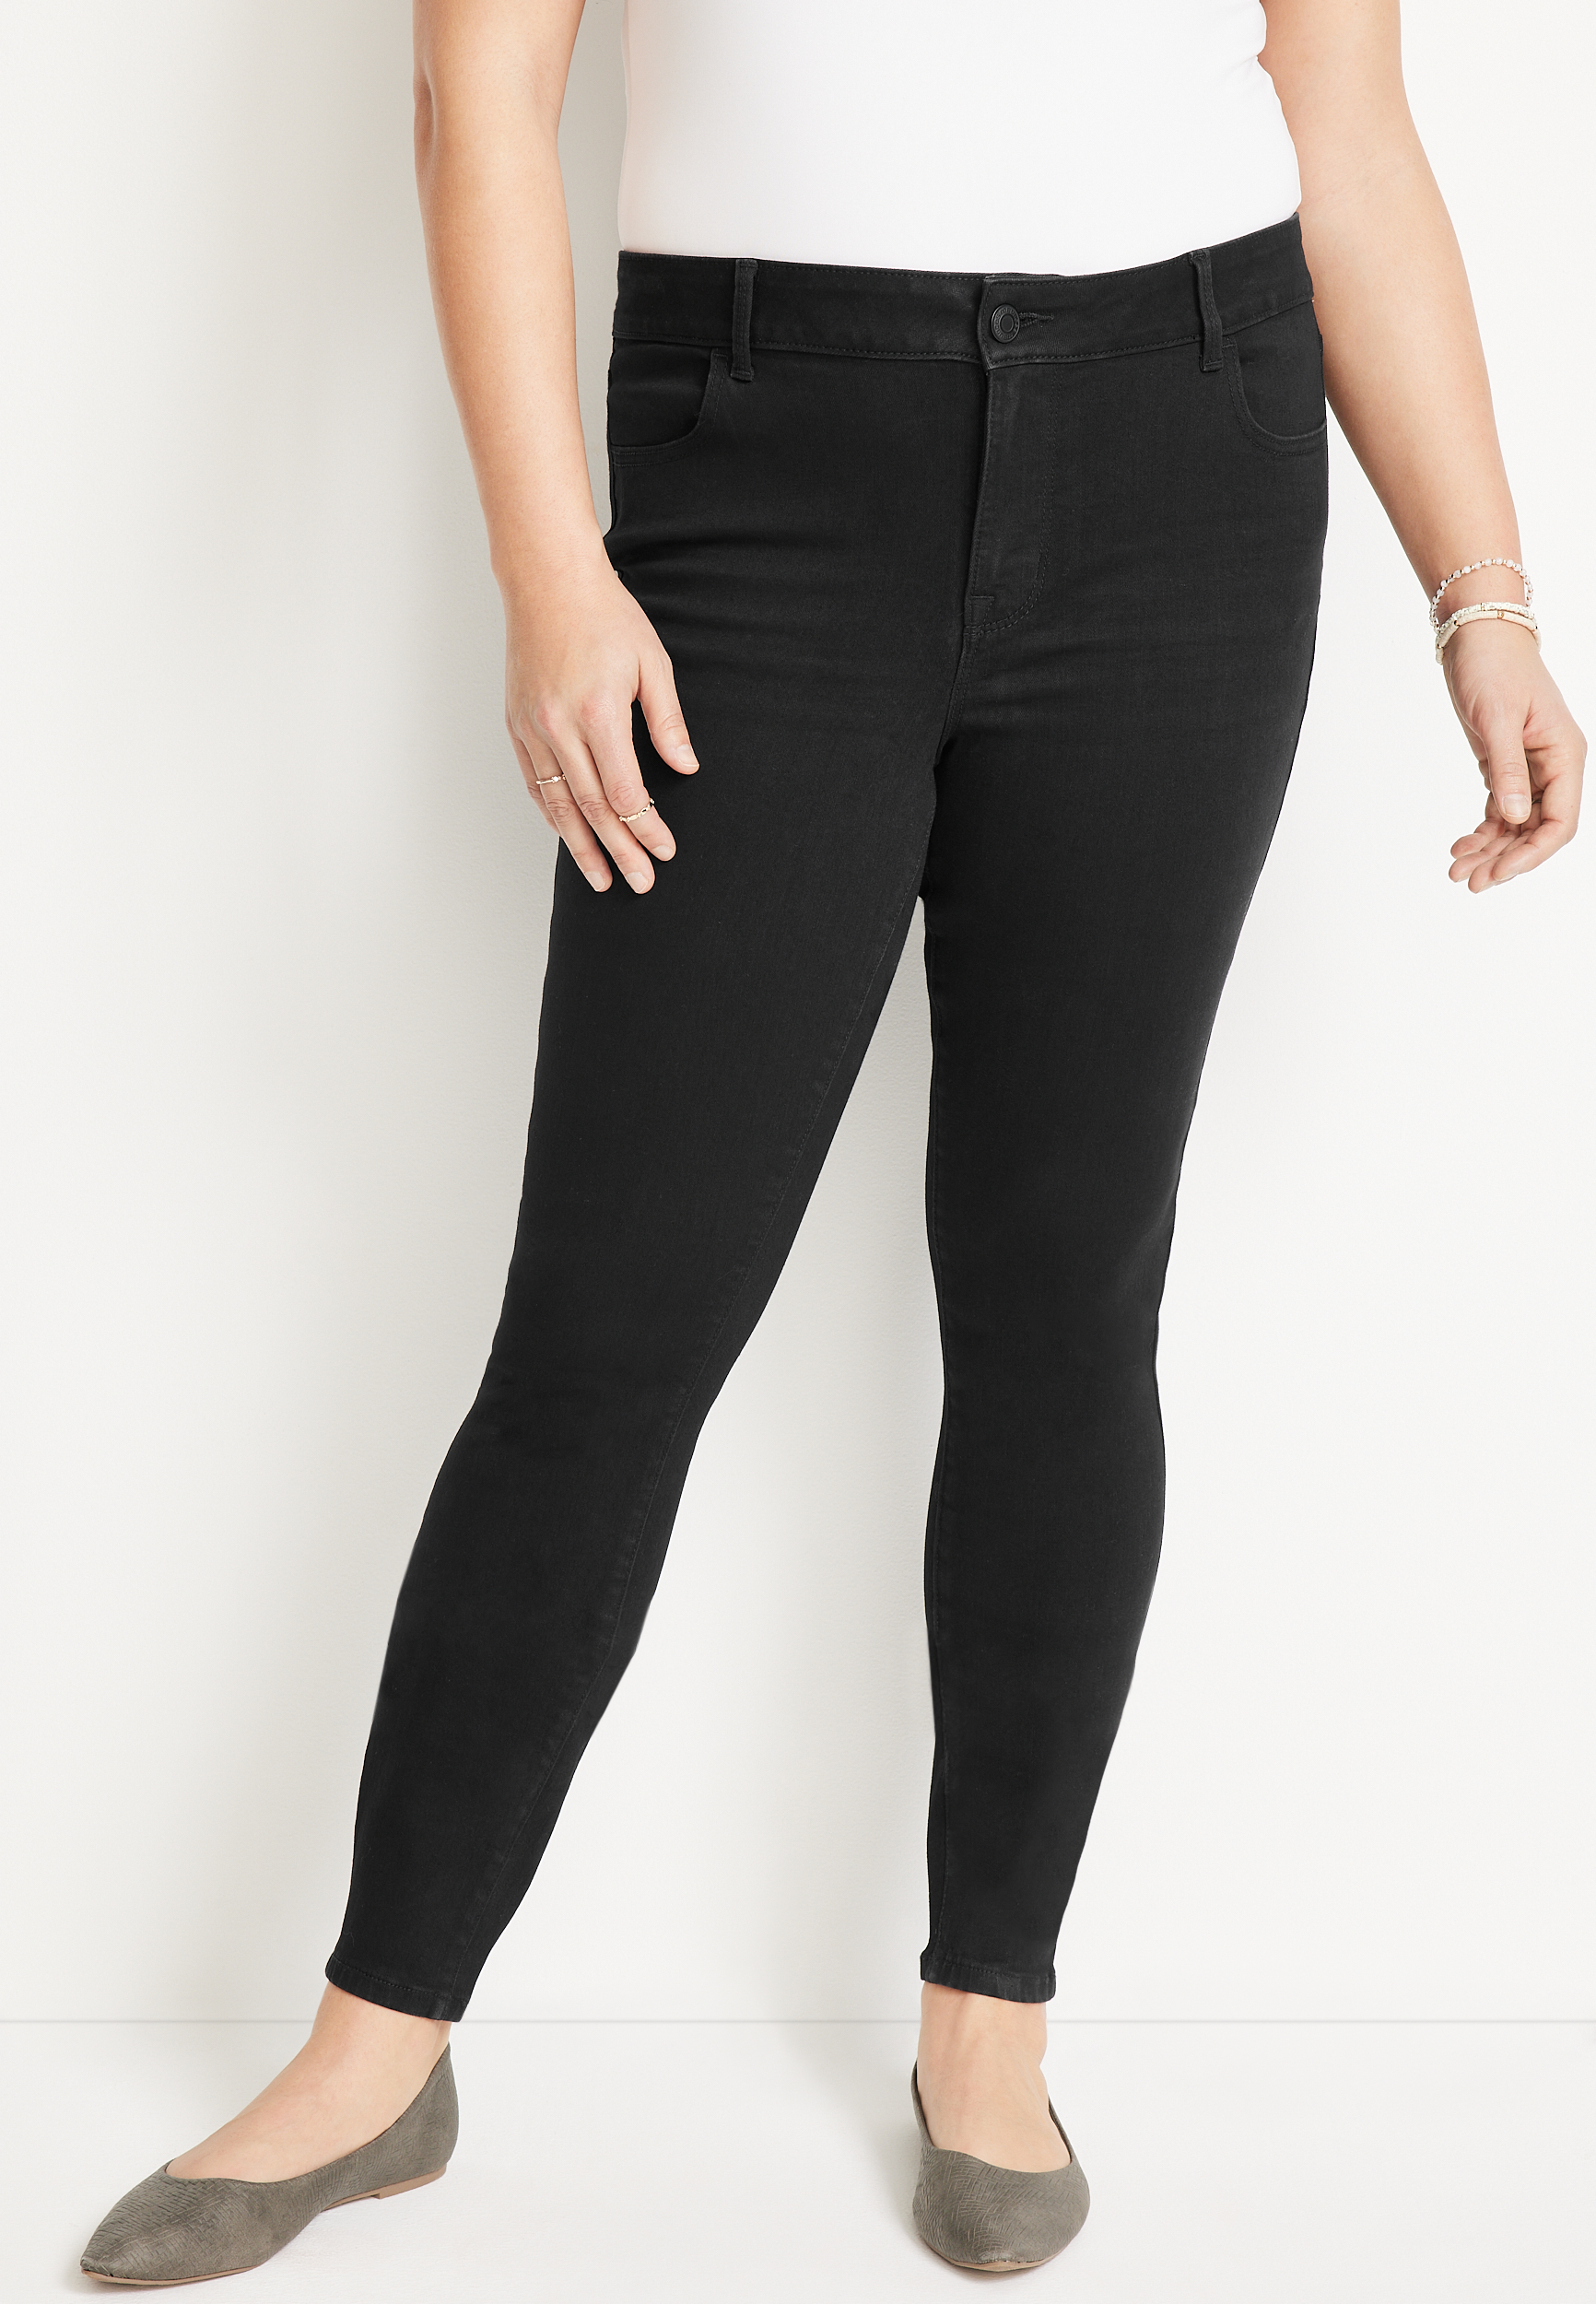 replica Darts Gevaar Plus Size m jeans by maurices™ Mid Fit Mid Rise Jegging | maurices